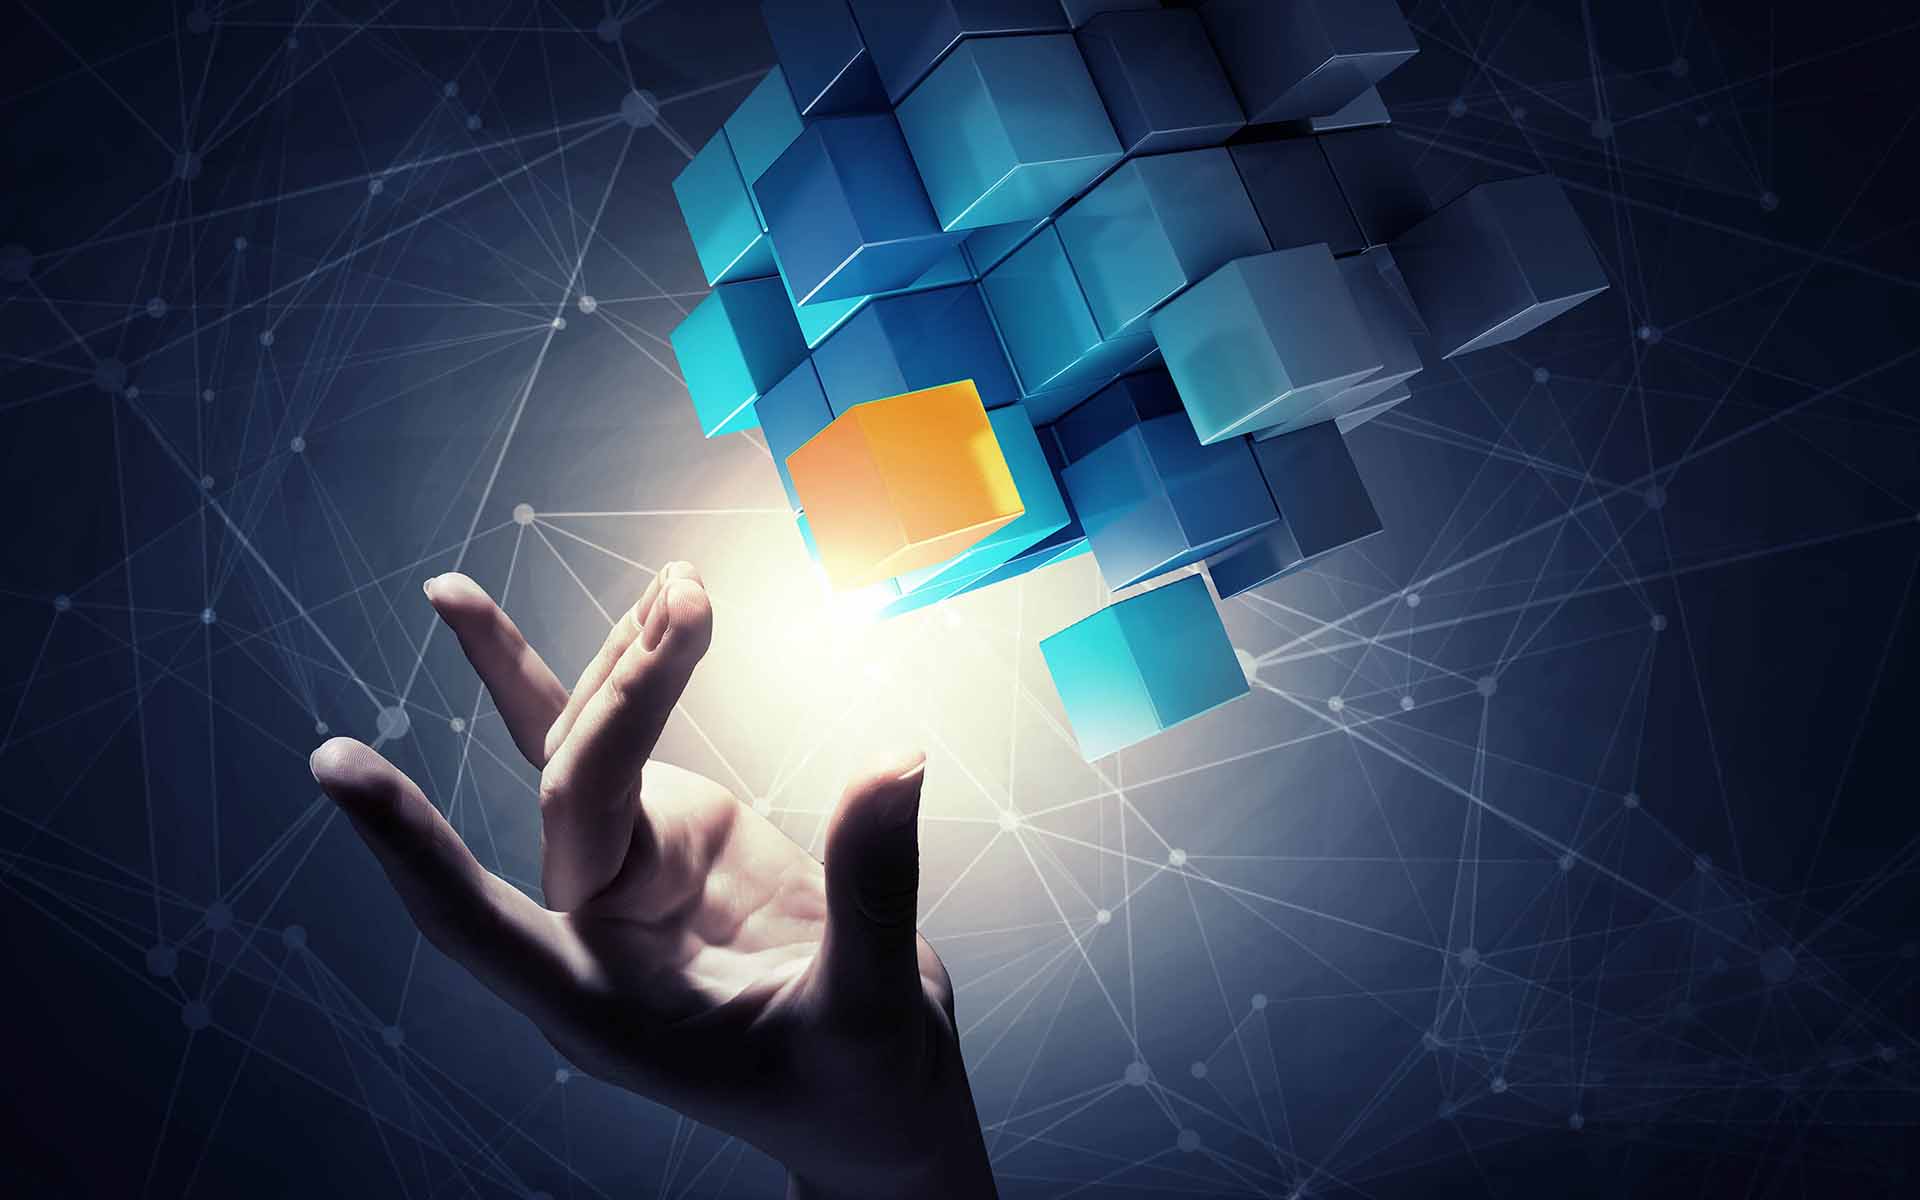 Digital illustration of a hand trying to hold yellow and blue cubes